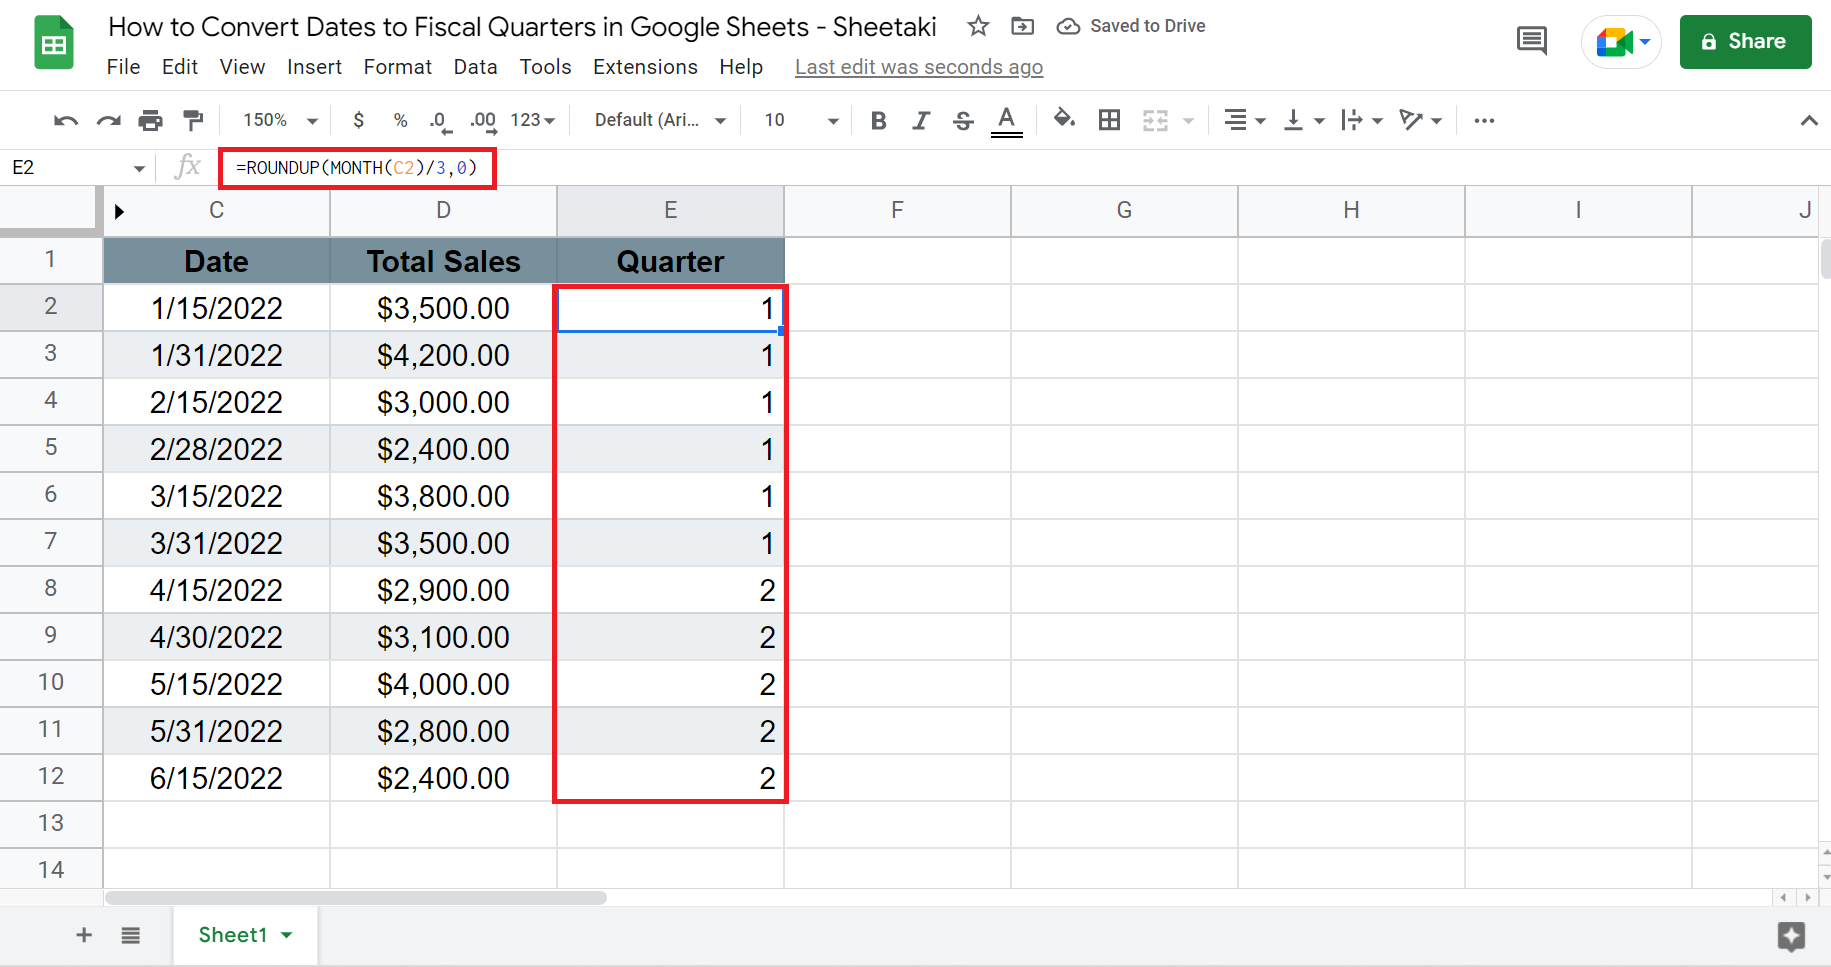 Convert Dates to Fiscal Quarters in Google Sheets